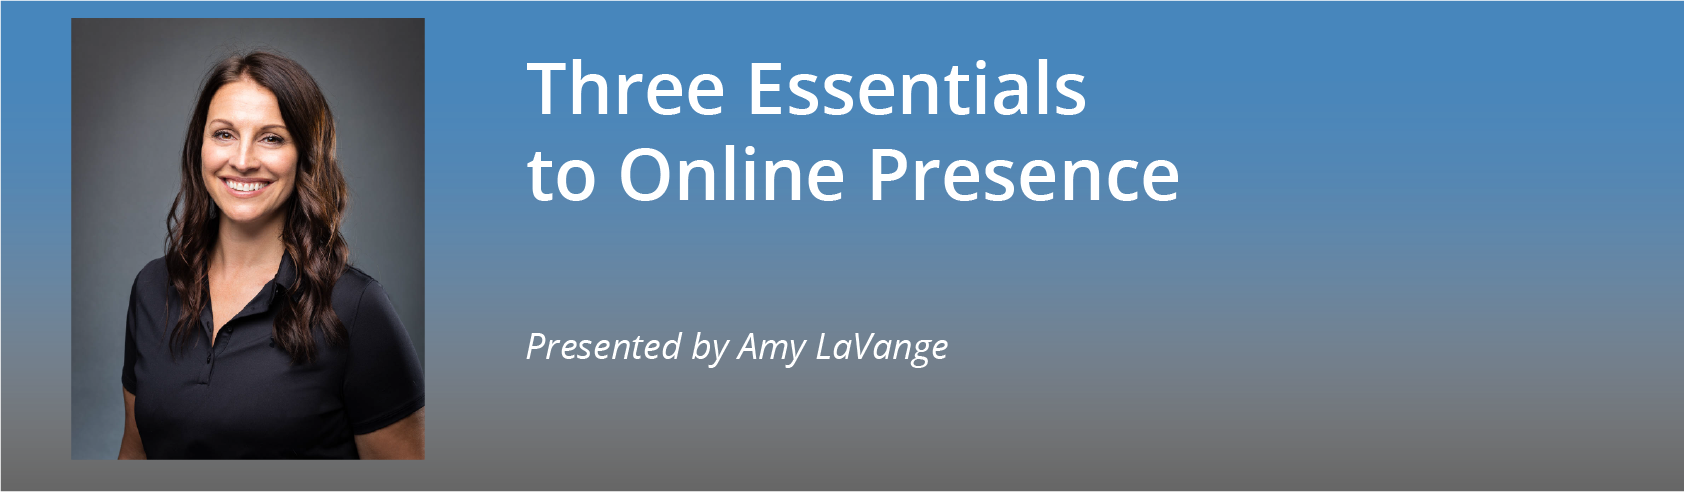 foreUP Virtual Summit | Three Essentials to Online Presence — Amy LaVange, Director of Marketing